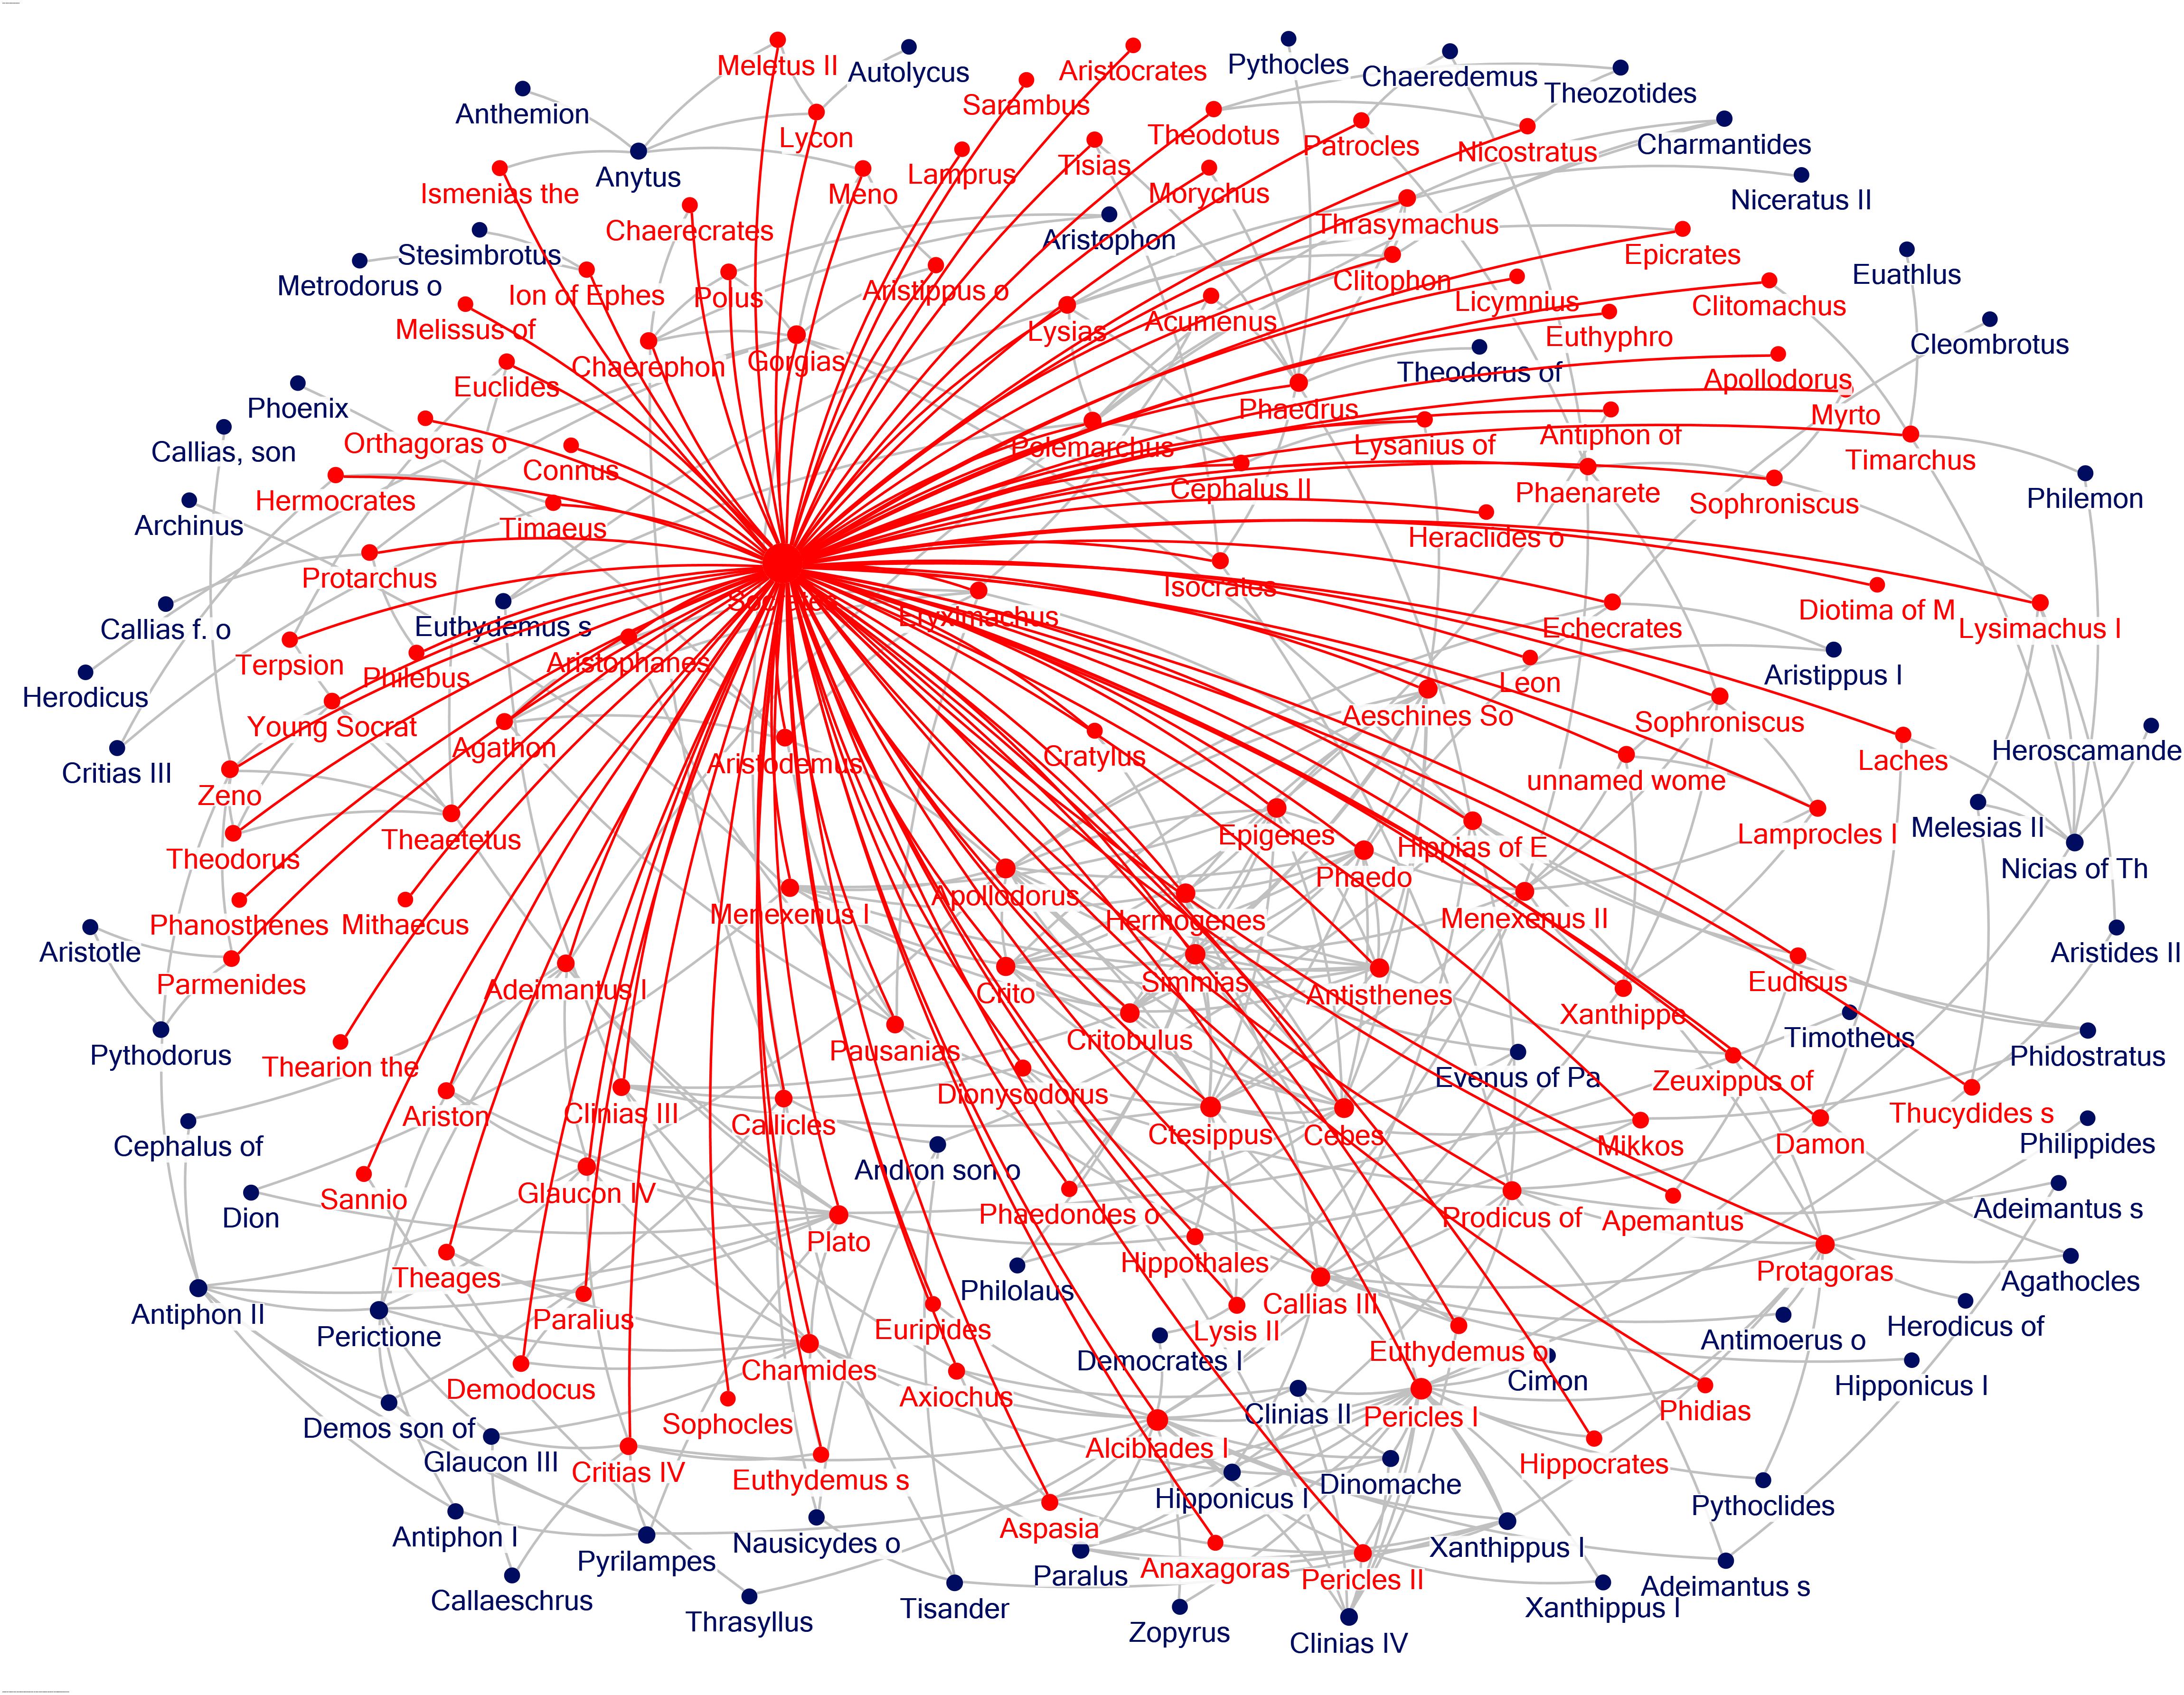 Figure 6. The Social Network of Socrates displayed to show core and periphery